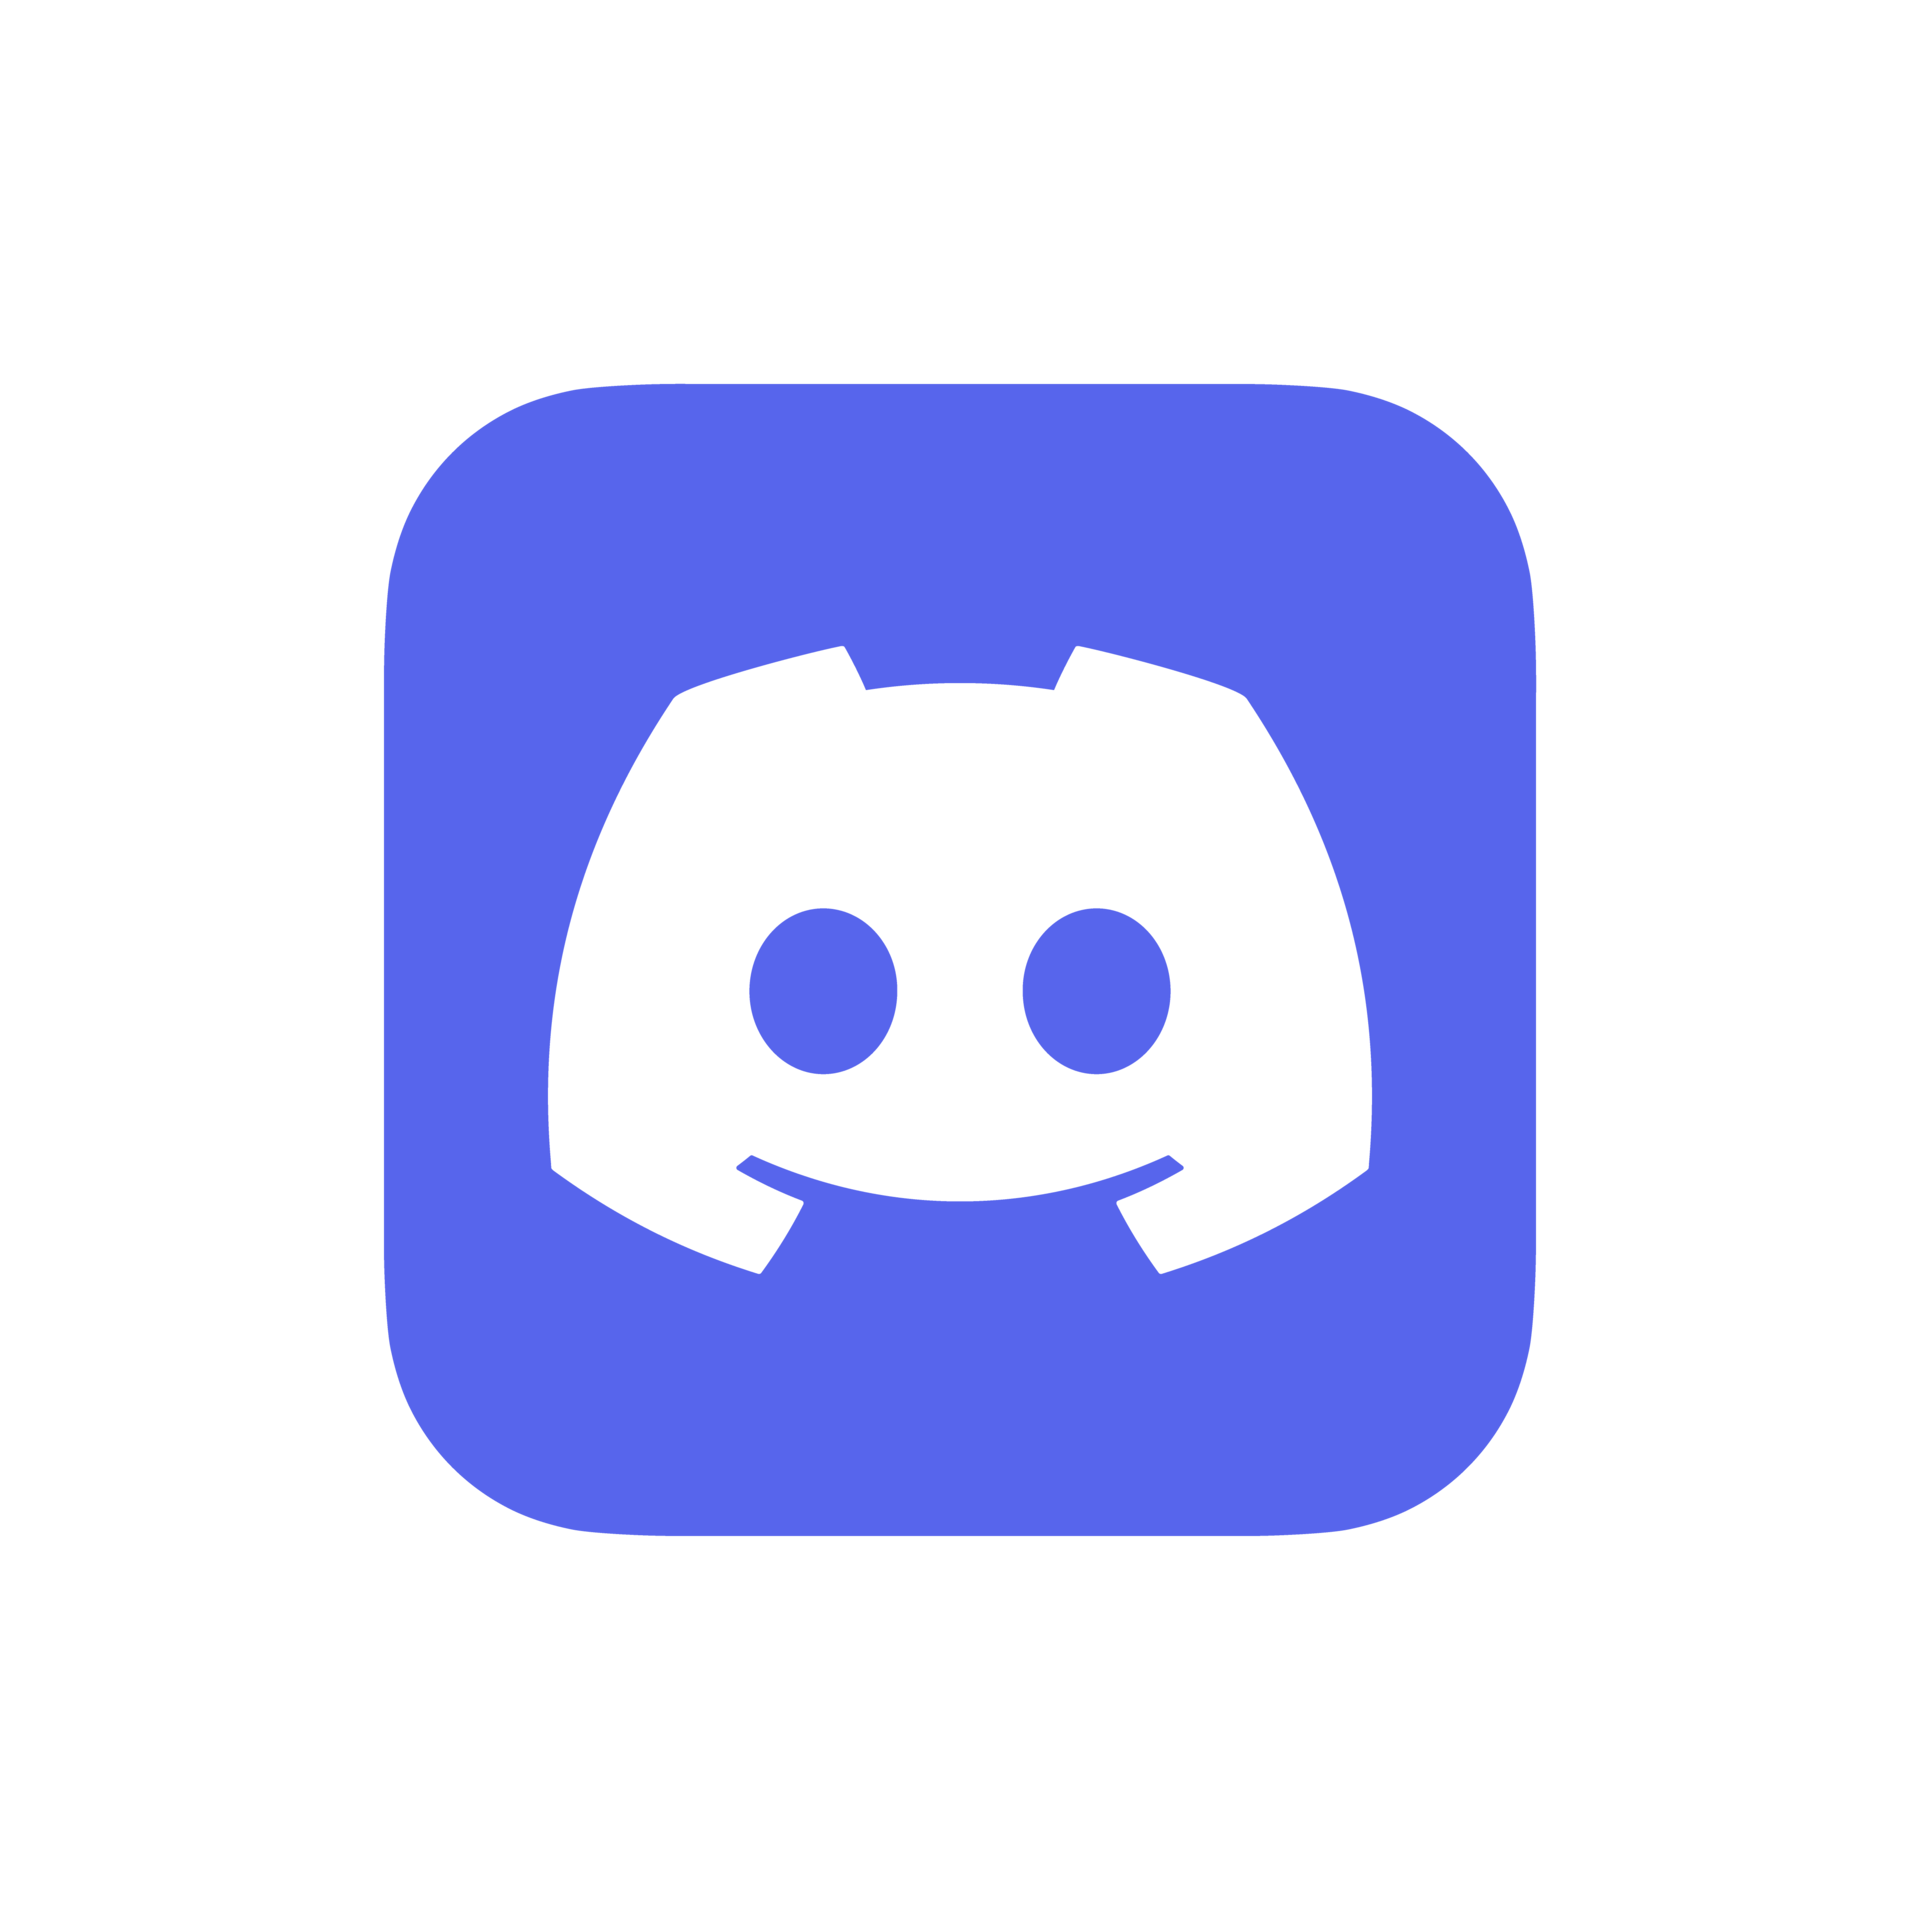 Discord is an instant messaging and social media app